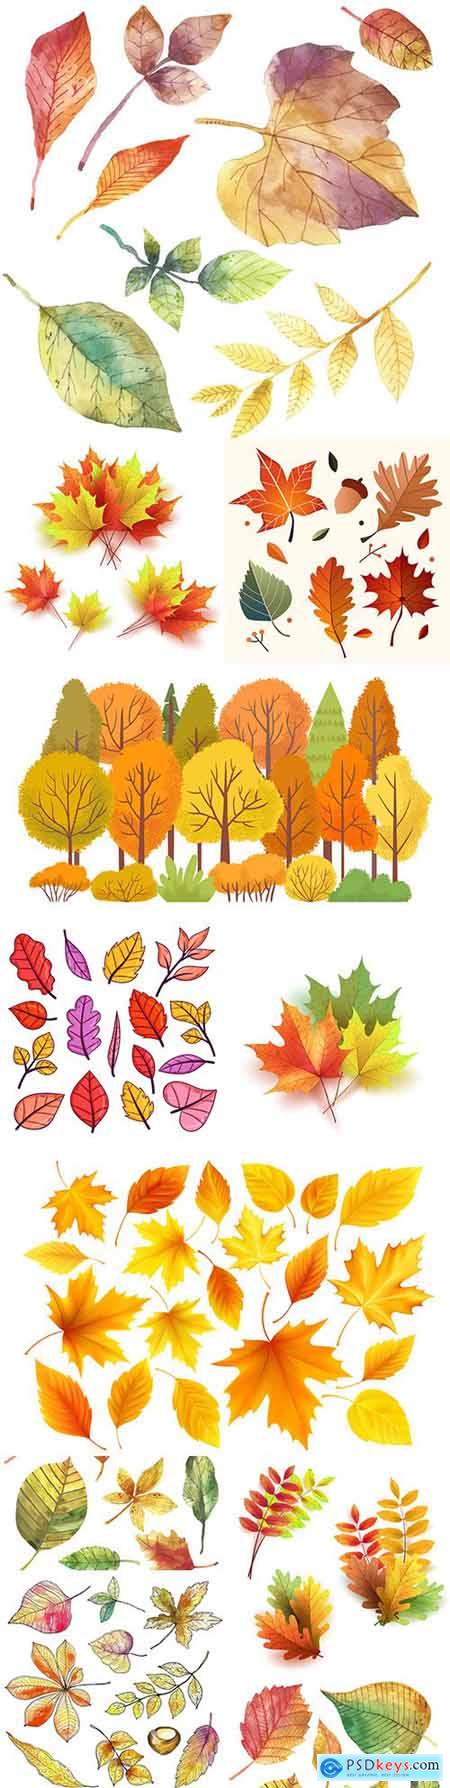 Autumn bright colorful different leaves illustration collection